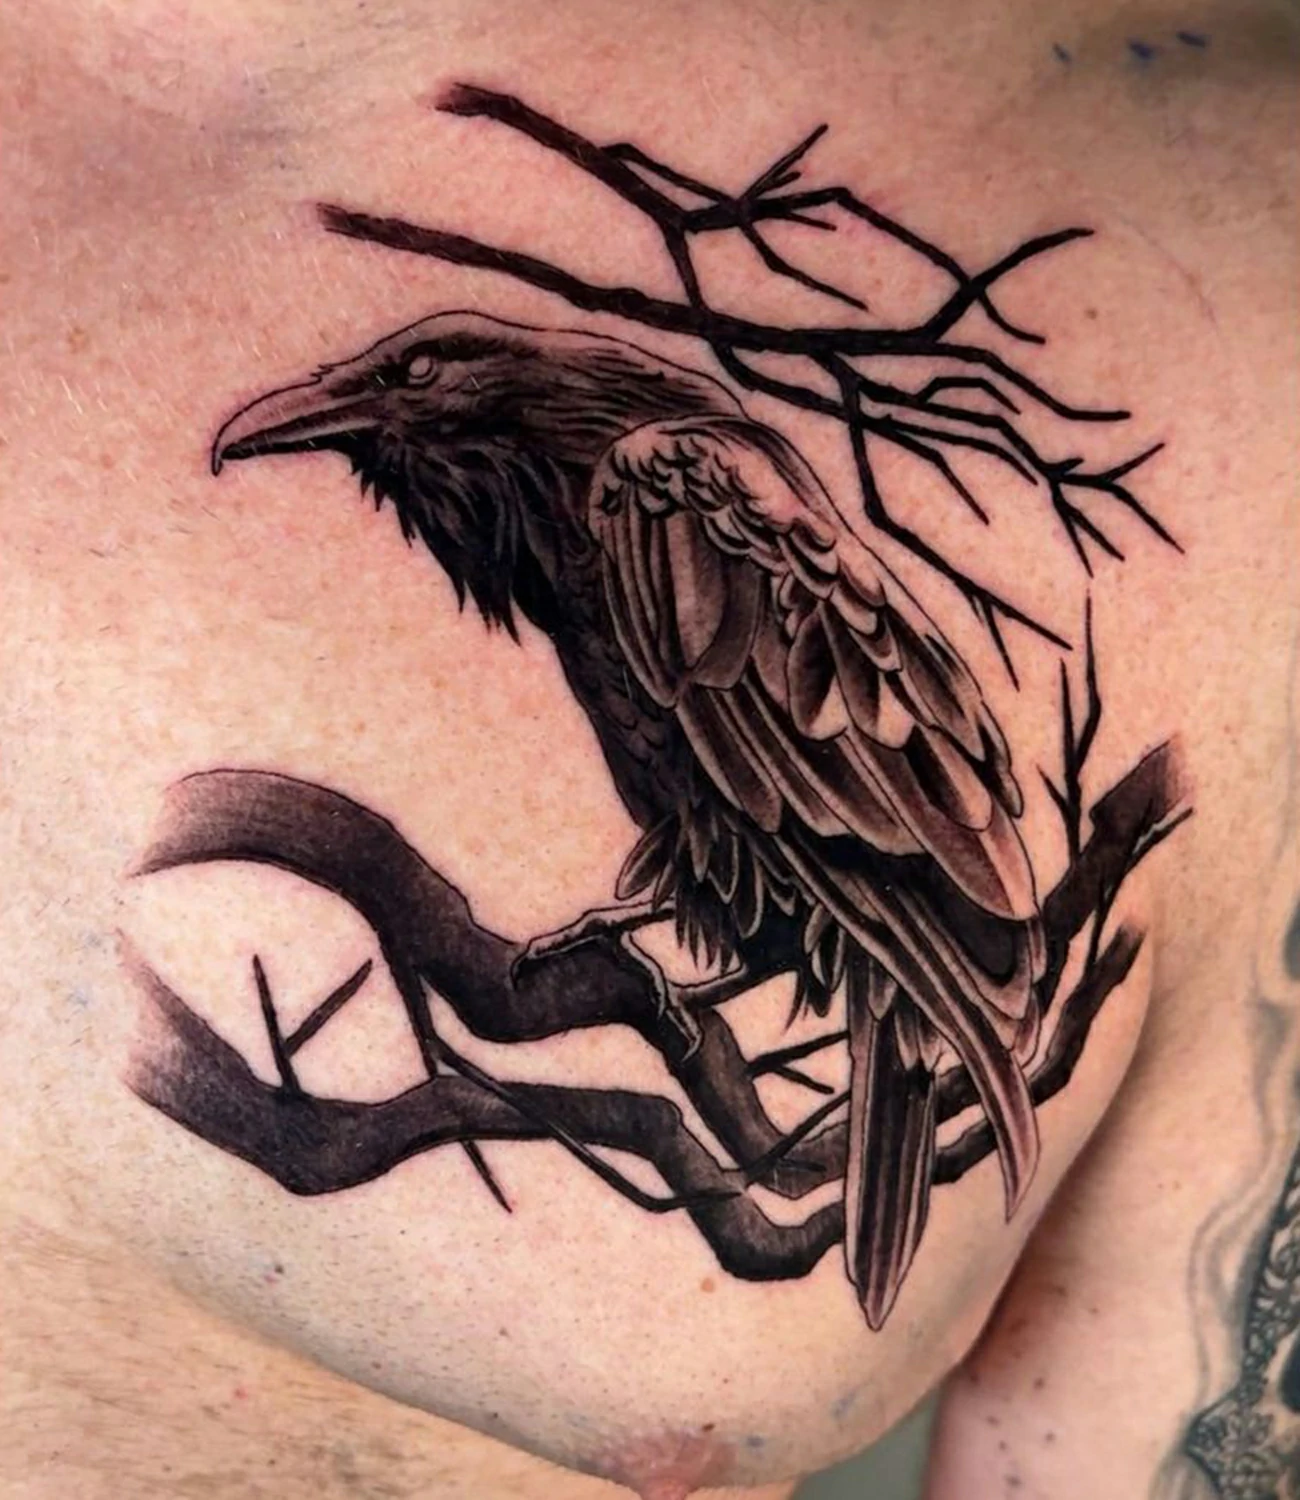 Sacred raven tattoo: A tattoo that highlights the sacred and spiritual symbolism of ravens.